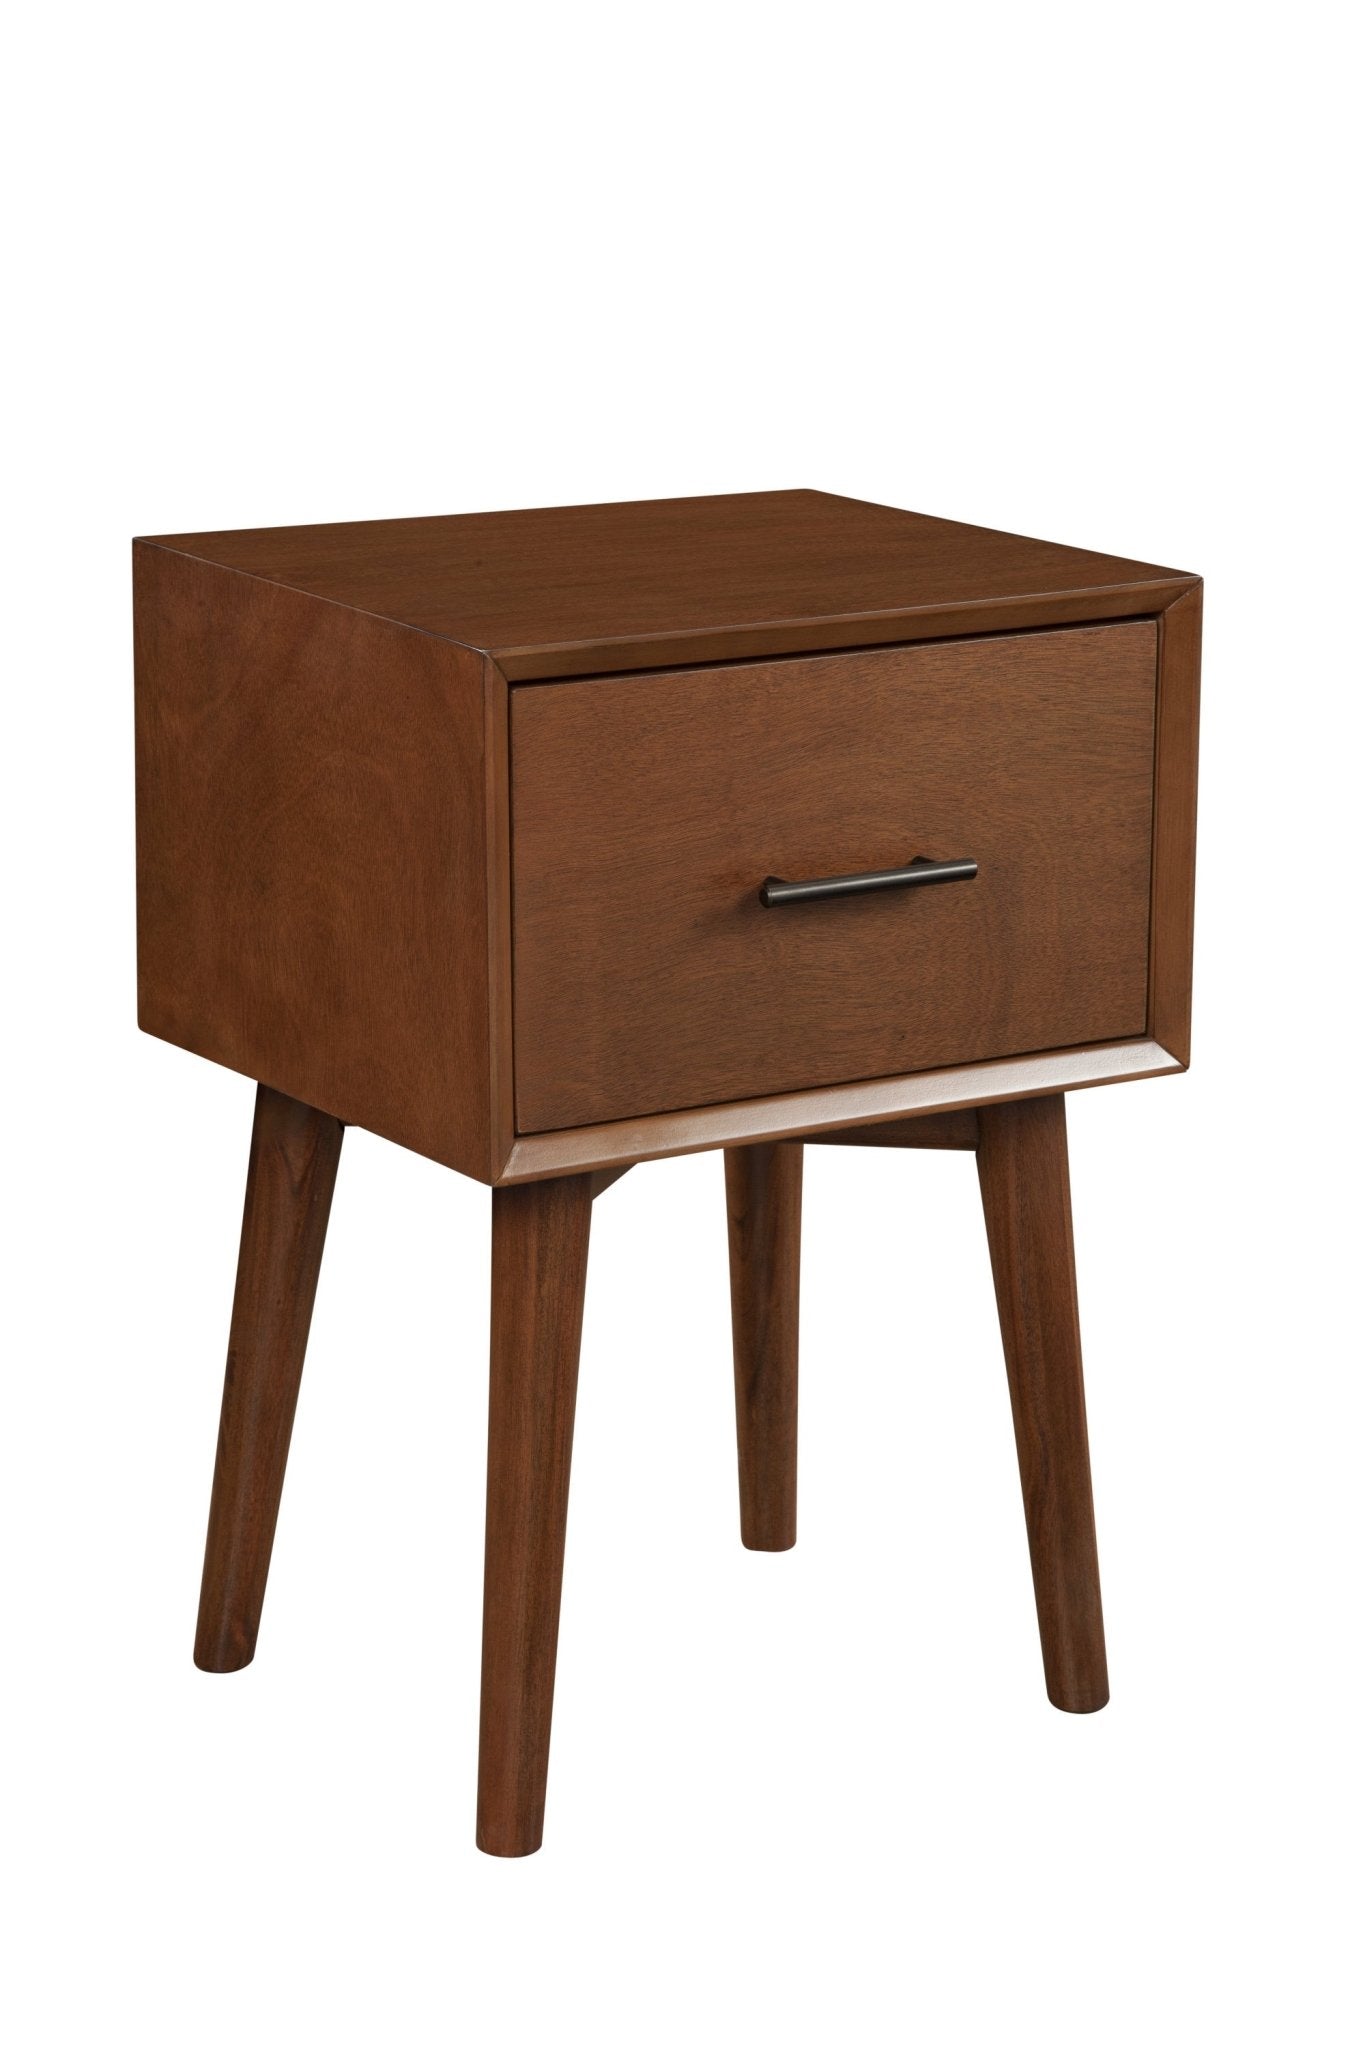 Brown Wood End Table With Drawer 27"